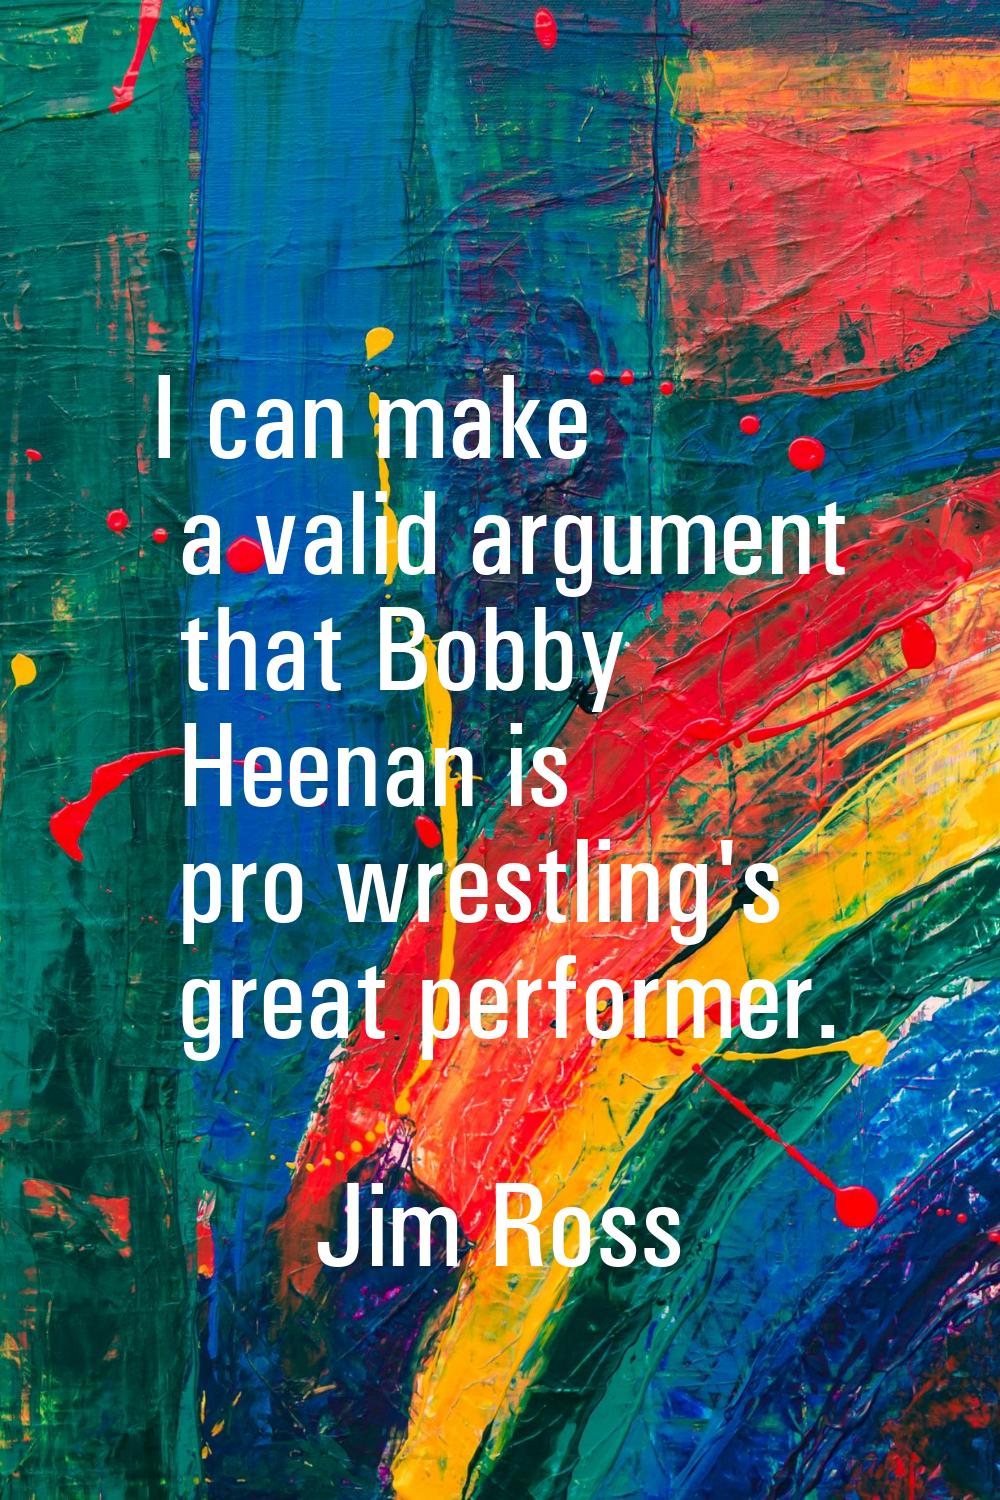 I can make a valid argument that Bobby Heenan is pro wrestling's great performer.